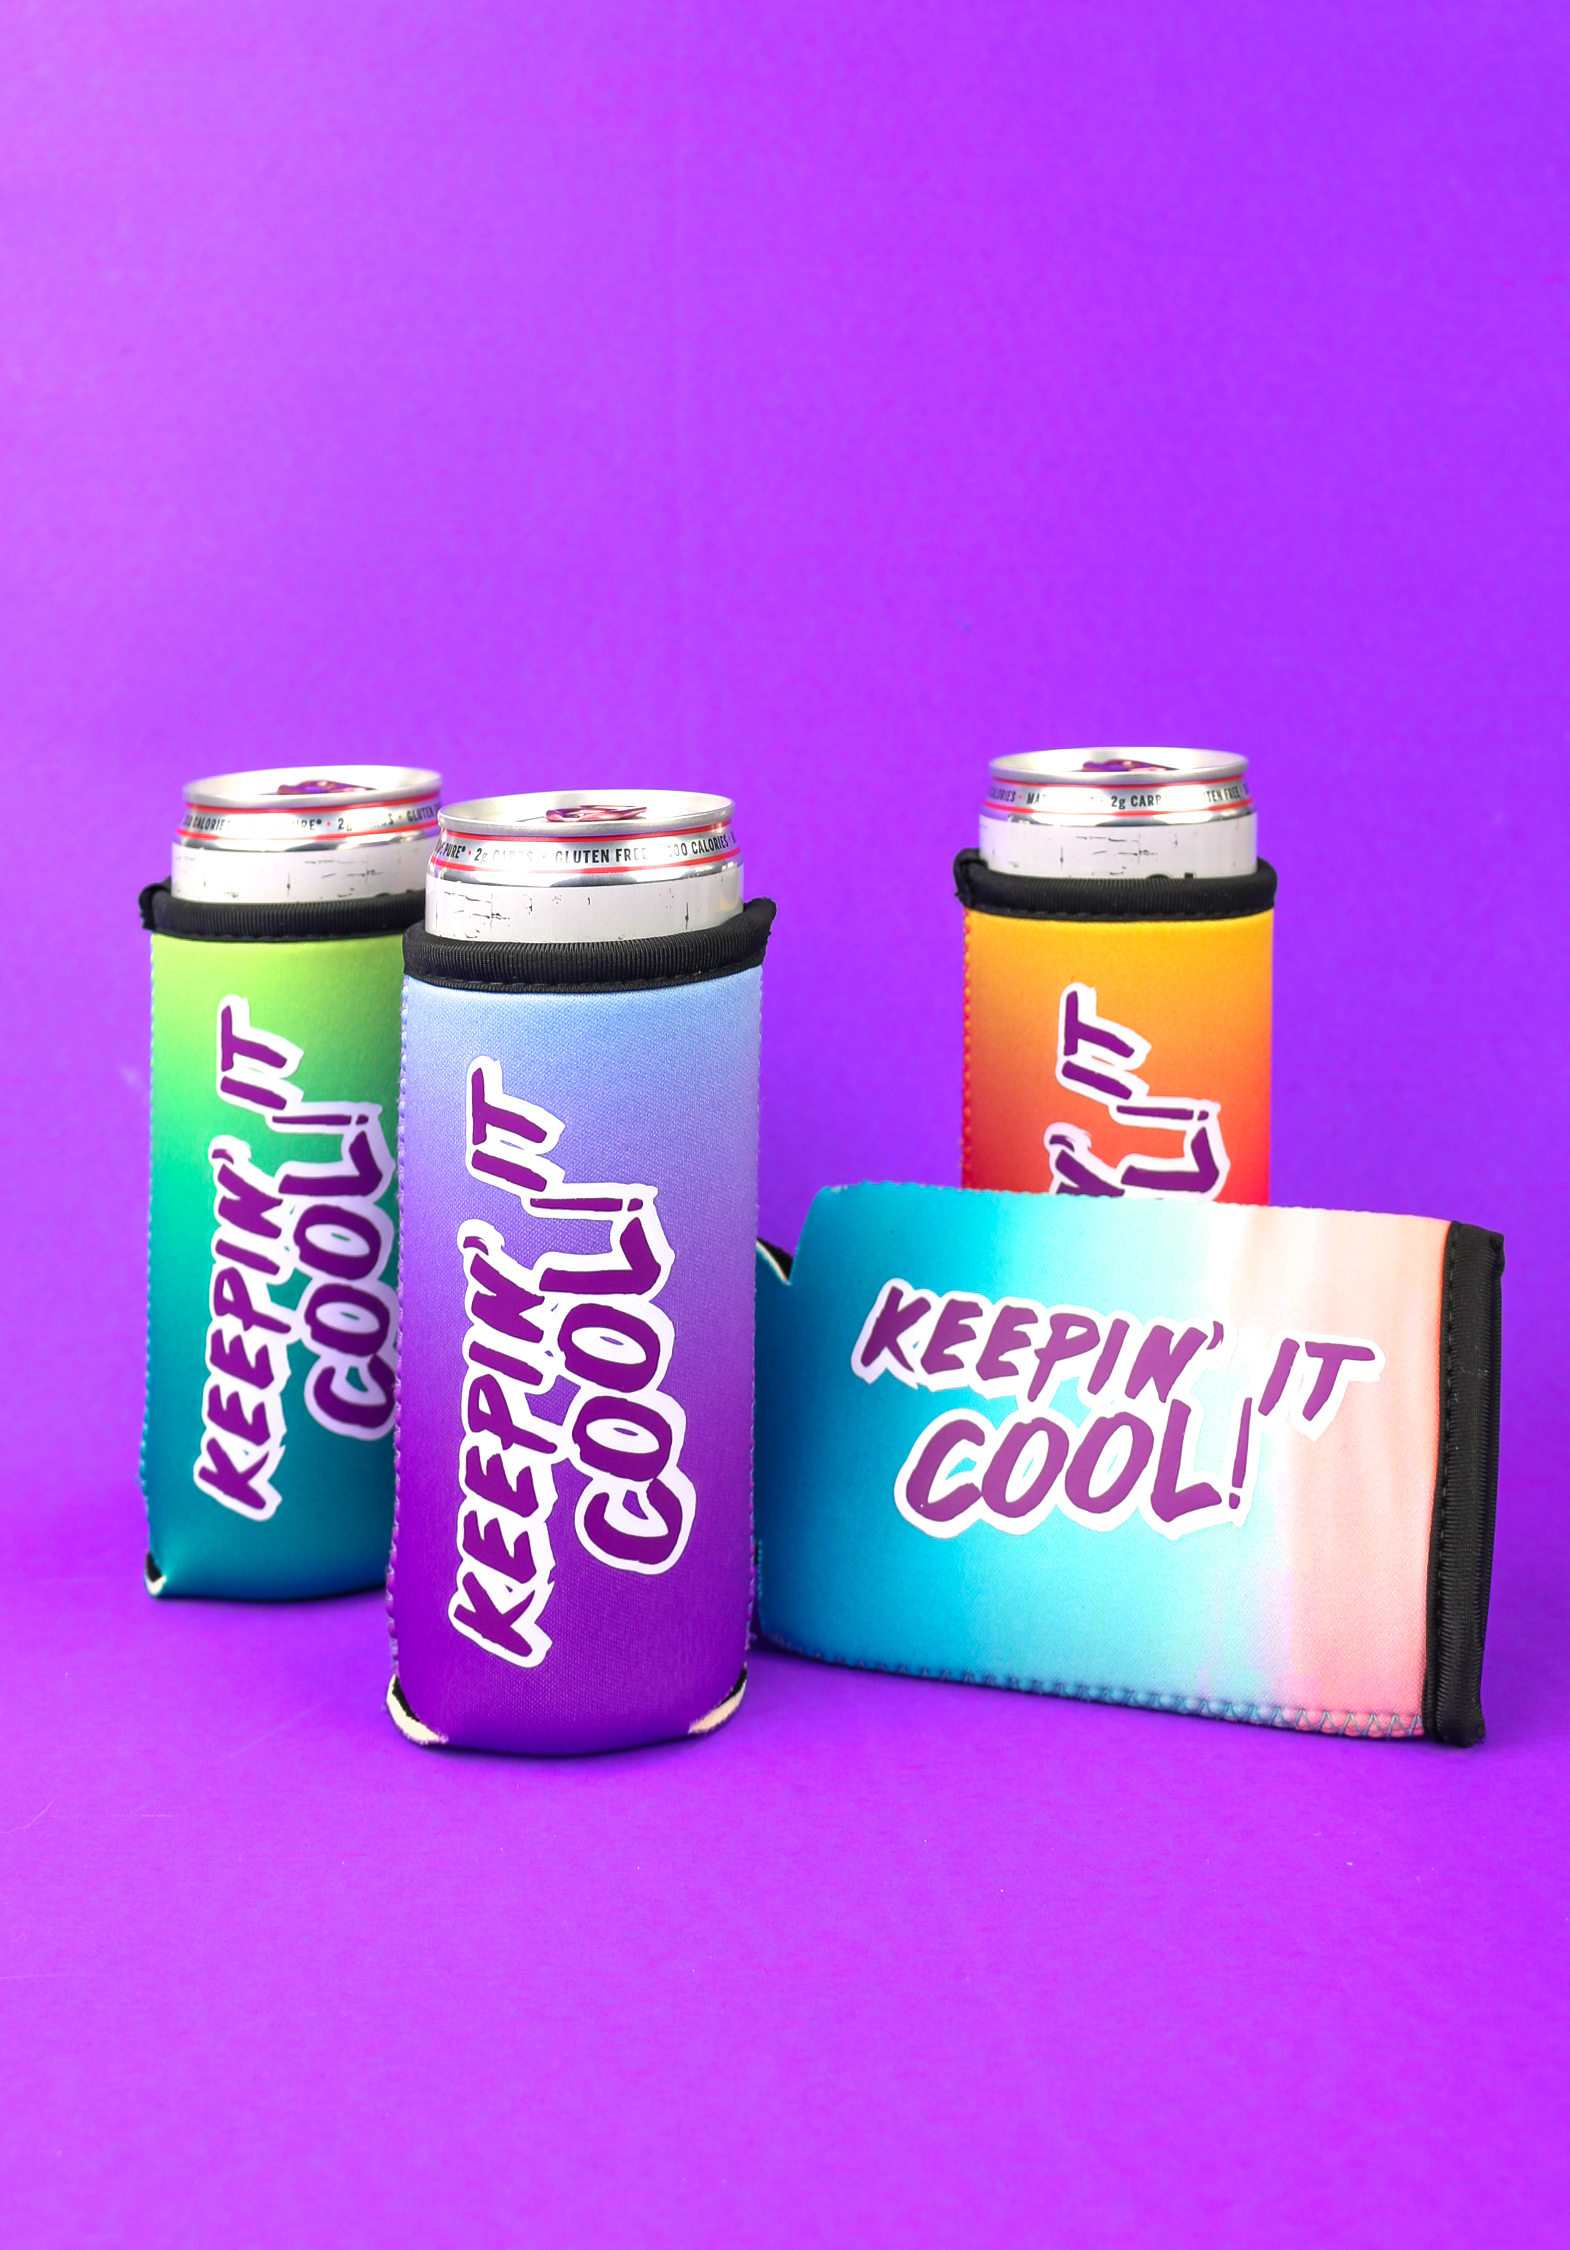 Cans of White Claw in personalized can koozies